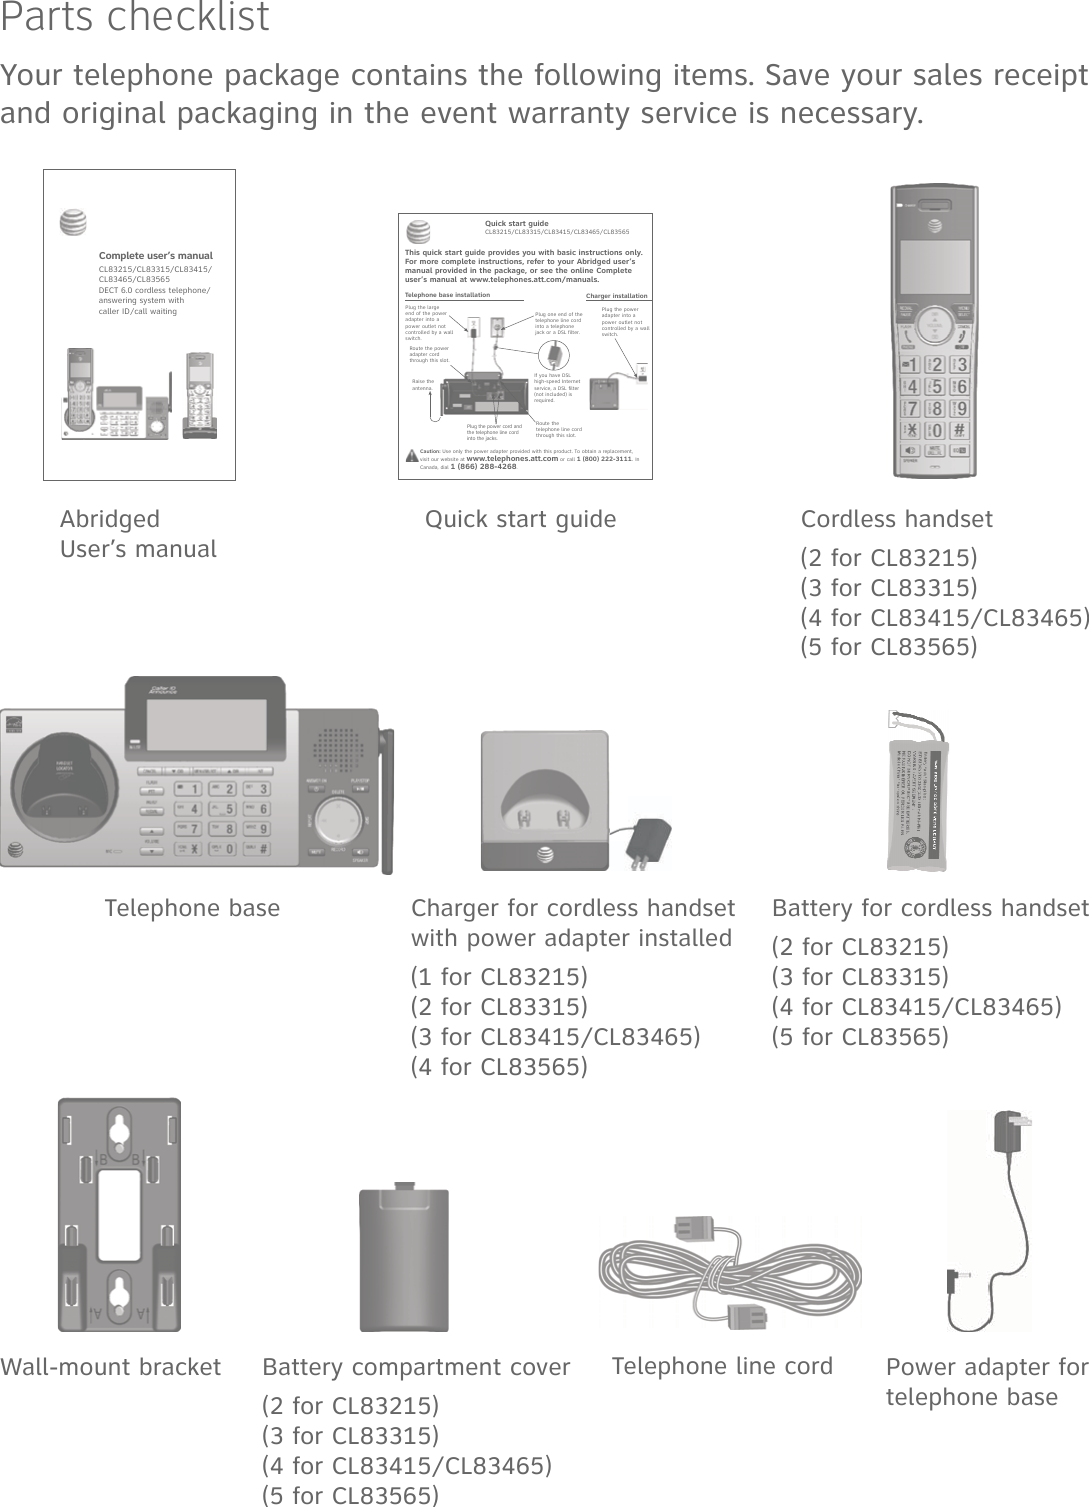 Parts checklistYour telephone package contains the following items. Save your sales receipt and original packaging in the event warranty service is necessary.Cordless handset(2 for CL83215)(3 for CL83315)(4 for CL83415/CL83465)(5 for CL83565)Charger for cordless handset with power adapter installed(1 for CL83215)(2 for CL83315)(3 for CL83415/CL83465)(4 for CL83565)Battery compartment cover(2 for CL83215)(3 for CL83315)(4 for CL83415/CL83465)(5 for CL83565)Telephone line cord Power adapter for telephone baseTelephone base Battery for cordless handset(2 for CL83215)(3 for CL83315)(4 for CL83415/CL83465)(5 for CL83565)Abridged User’s manualQuick start guideCaution: Use only the power adapter provided with this product. To obtain a replacement, visit our website at www.telephones.att.com or call 1 (800) 222-3111. In Canada, dial 1 (866) 288-4268.Telephone base installationThis quick start guide provides you with basic instructions only. For more complete instructions, refer to your Abridged user’s manual provided in the package, or see the online Complete user’s manual at www.telephones.att.com/manuals.Quick start guideCL83215/CL83315/CL83415/CL83465/CL83565Raise the antenna.Plug the power cord and the telephone line cord into the jacks.Plug one end of the telephone line cord into a telephone jack or a DSL filter.Charger installationPlug the power adapter into a power outlet not controlled by a wall switch.Complete user’s manualCL83215/CL83315/CL83415/CL83465/CL83565DECT 6.0 cordless telephone/answering system with  caller ID/call waiting Plug the large end of the power adapter into a power outlet not controlled by a wall switch.Route the power adapter cord through this slot.If you have DSL high-speed Internet service, a DSL filter (not included) is required.Route the telephone line cord through this slot.Wall-mount bracket